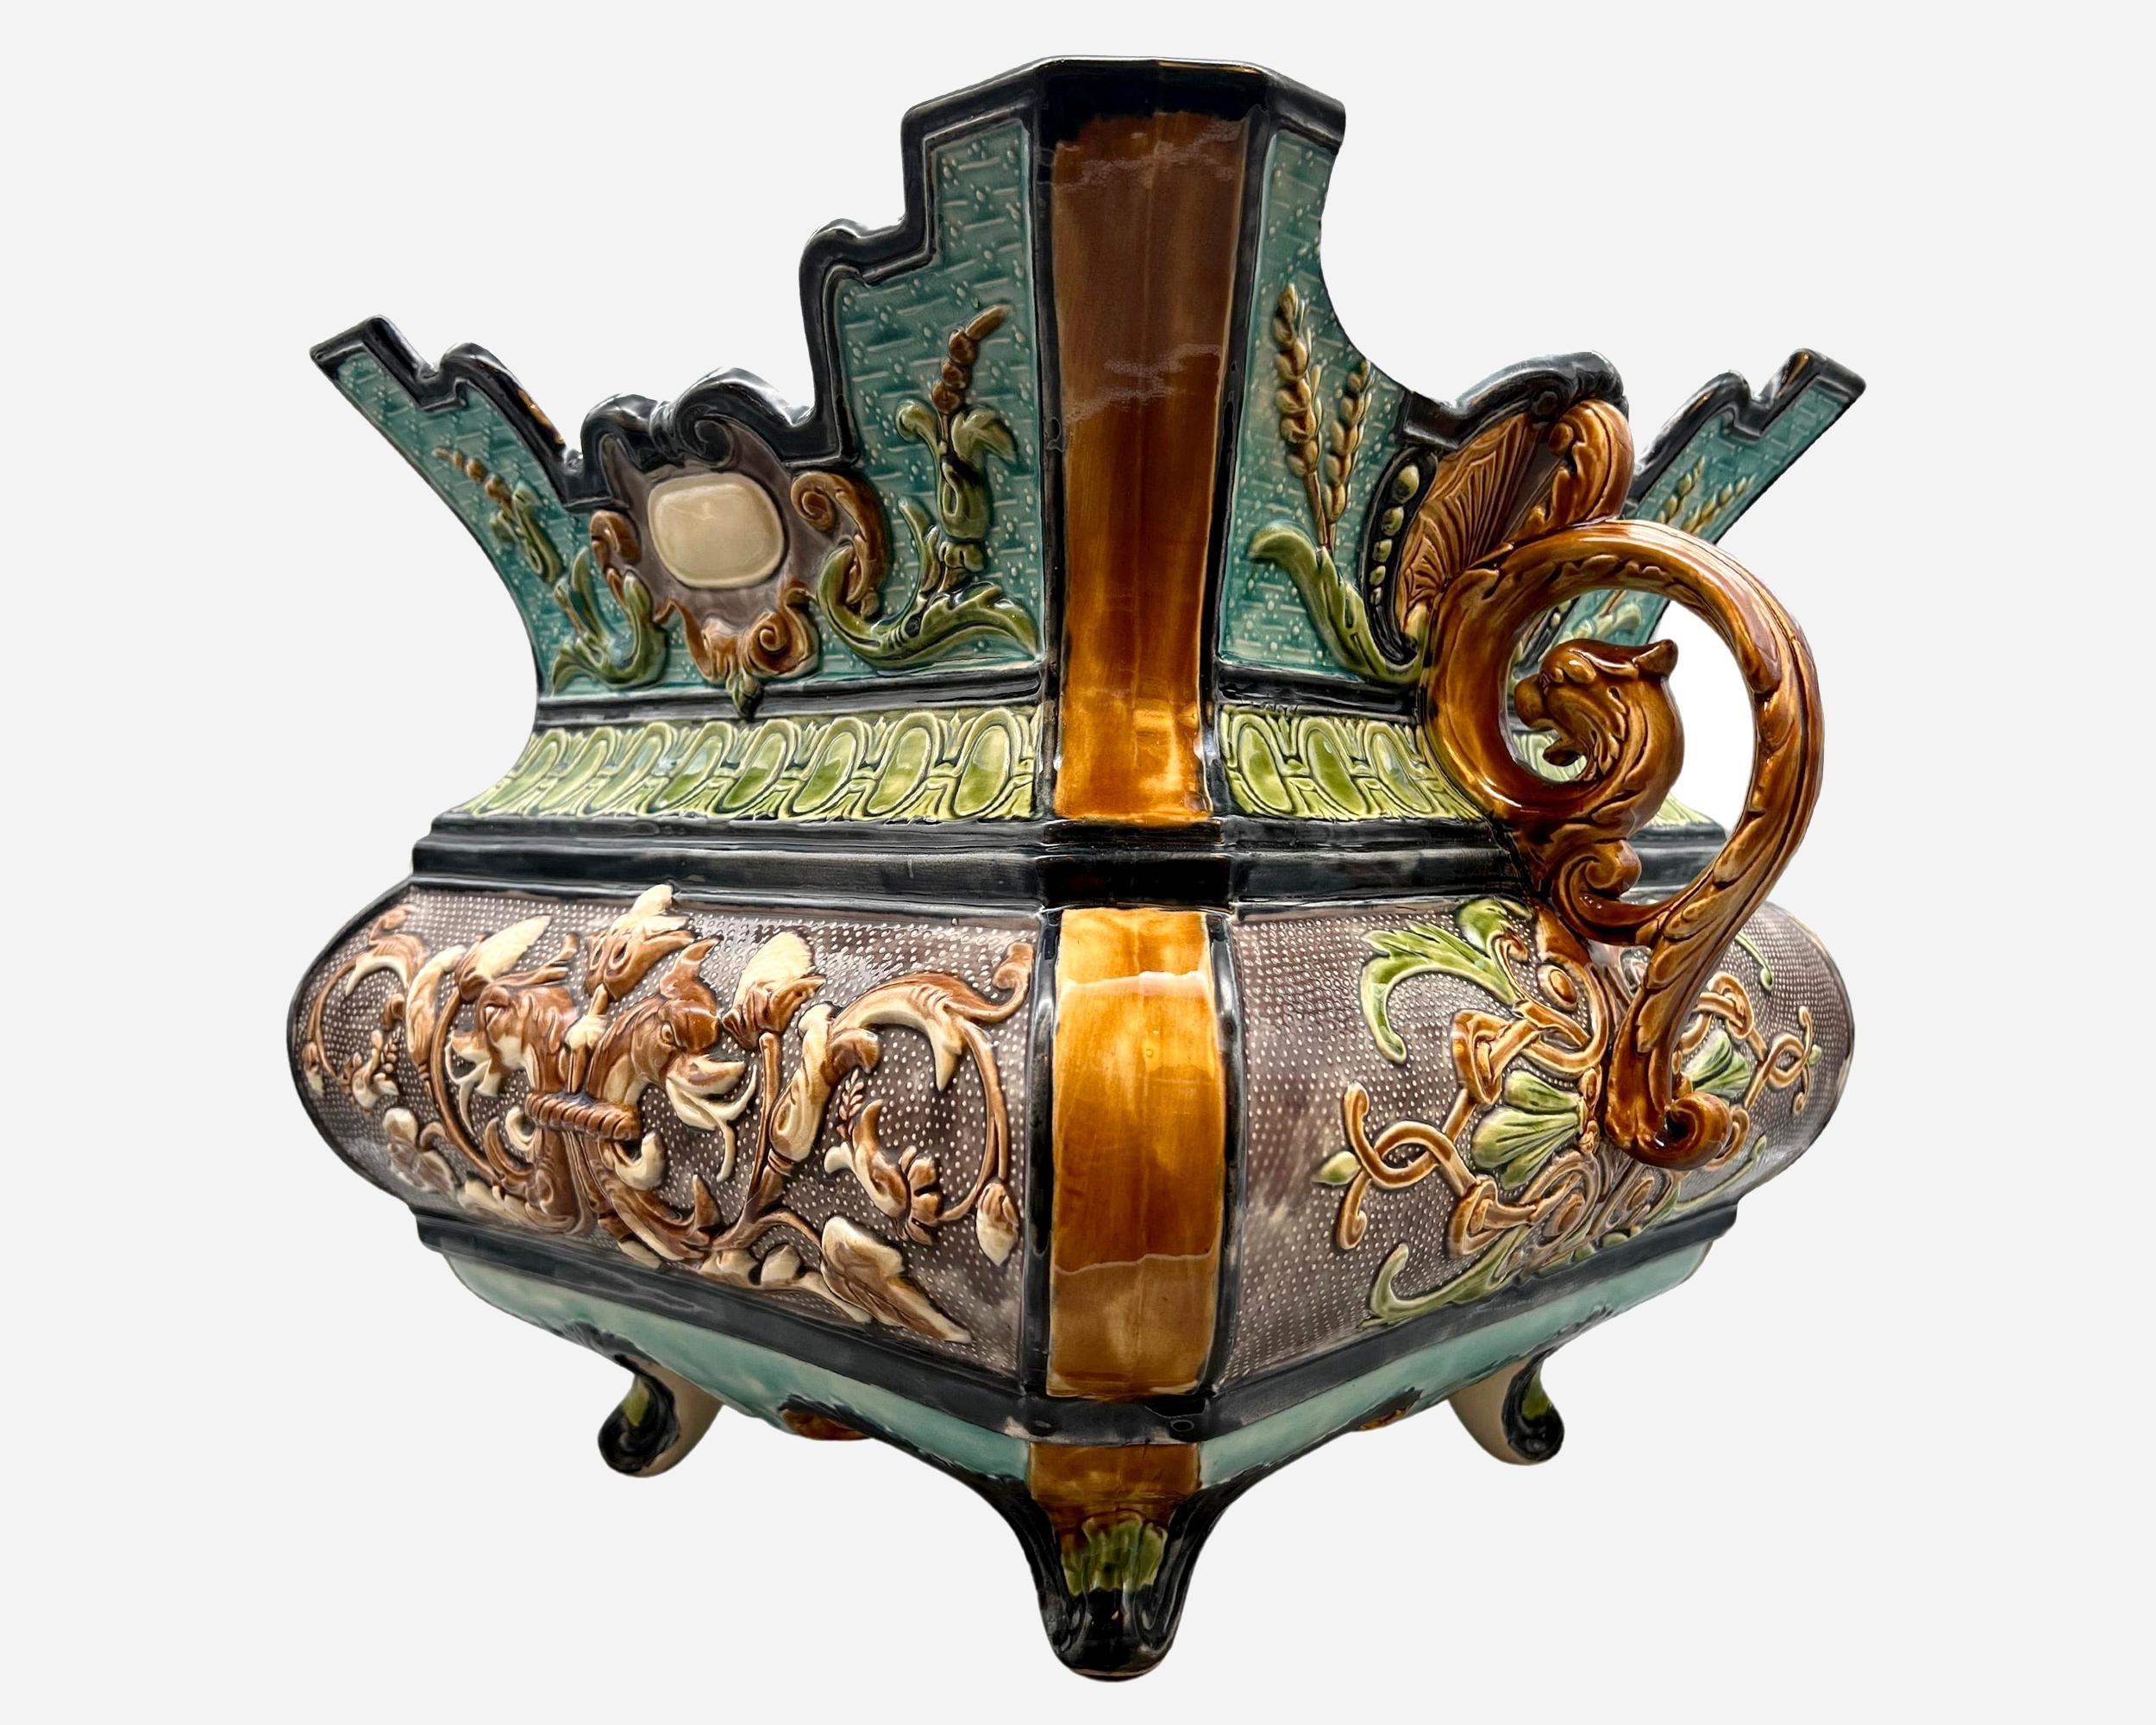 Large glazed earthenware cachepot with relief decoration of flowers, arabesques and griffins in cartouches.
Griffin-shaped handles.

The Onnaing earthenware factory was founded on February 2, 1821 by brothers Ferdinand-Louis de Bousies, Charles de